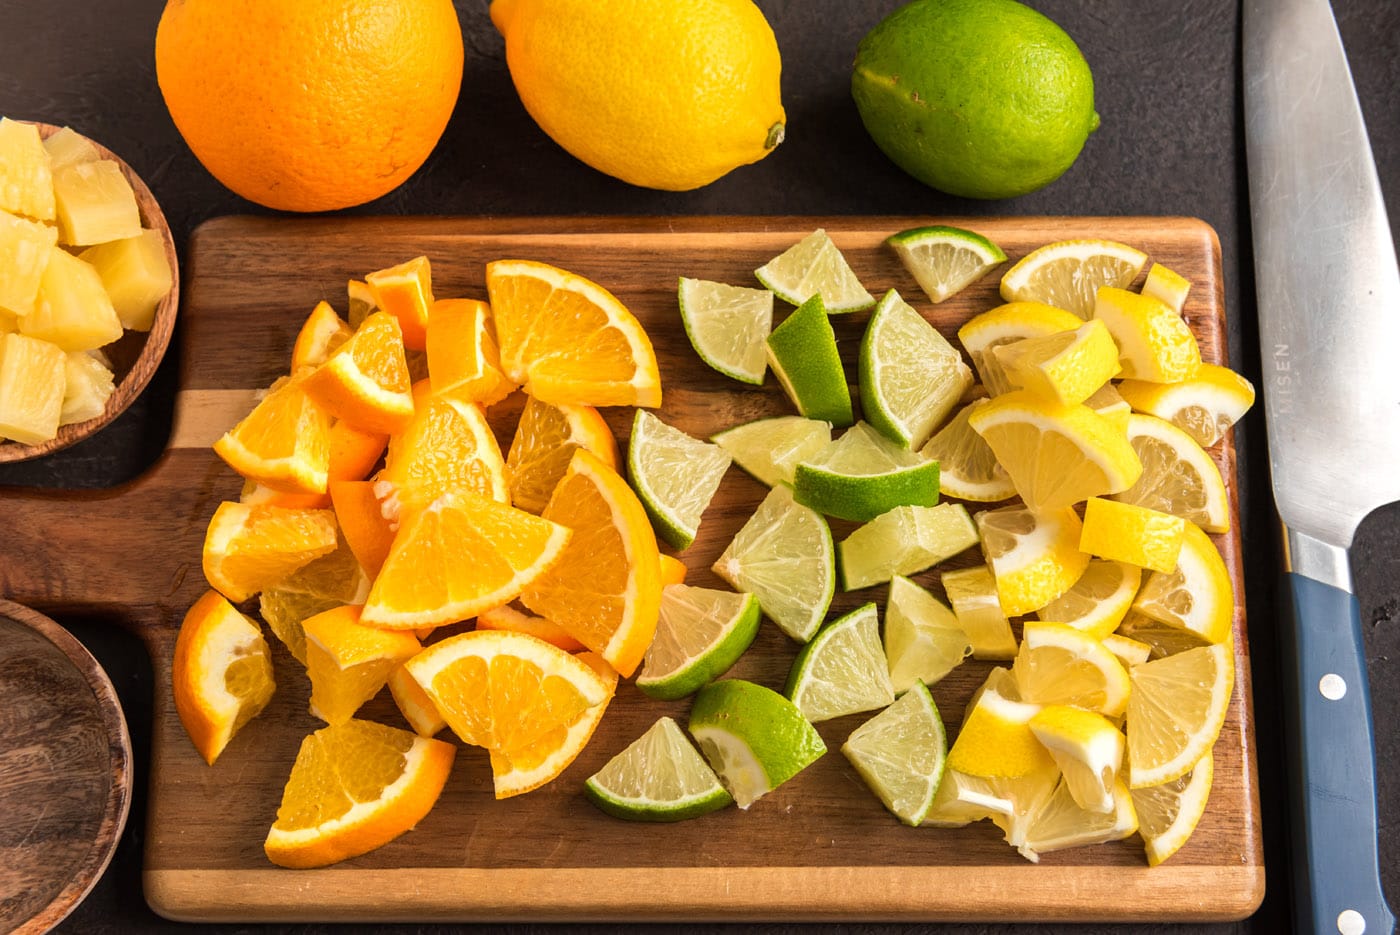 sliced oranges, limes, and lemons on a cutting board